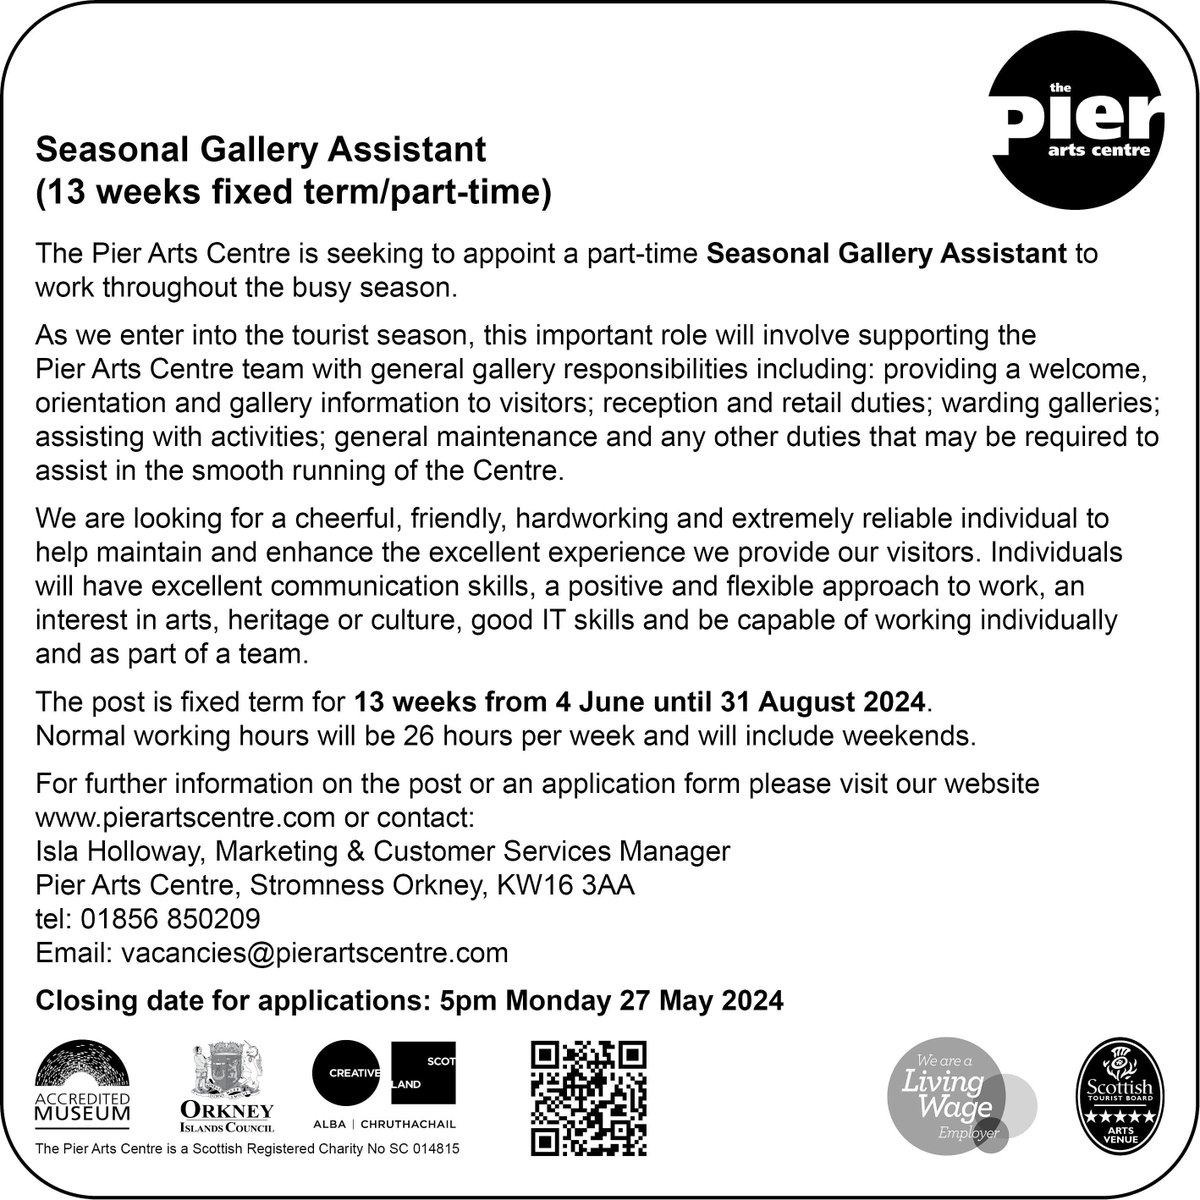 JOIN OUR TEAM - SEASONAL GALLERY ASSISTANT POST A new opportunity has arisen to join our small team and to help deliver exceptional customer care for Orkney’s five star Arts Venue. Closing date 5pm, Mon 27 May For details head to buff.ly/4dyWk2l #PierArtsCentre